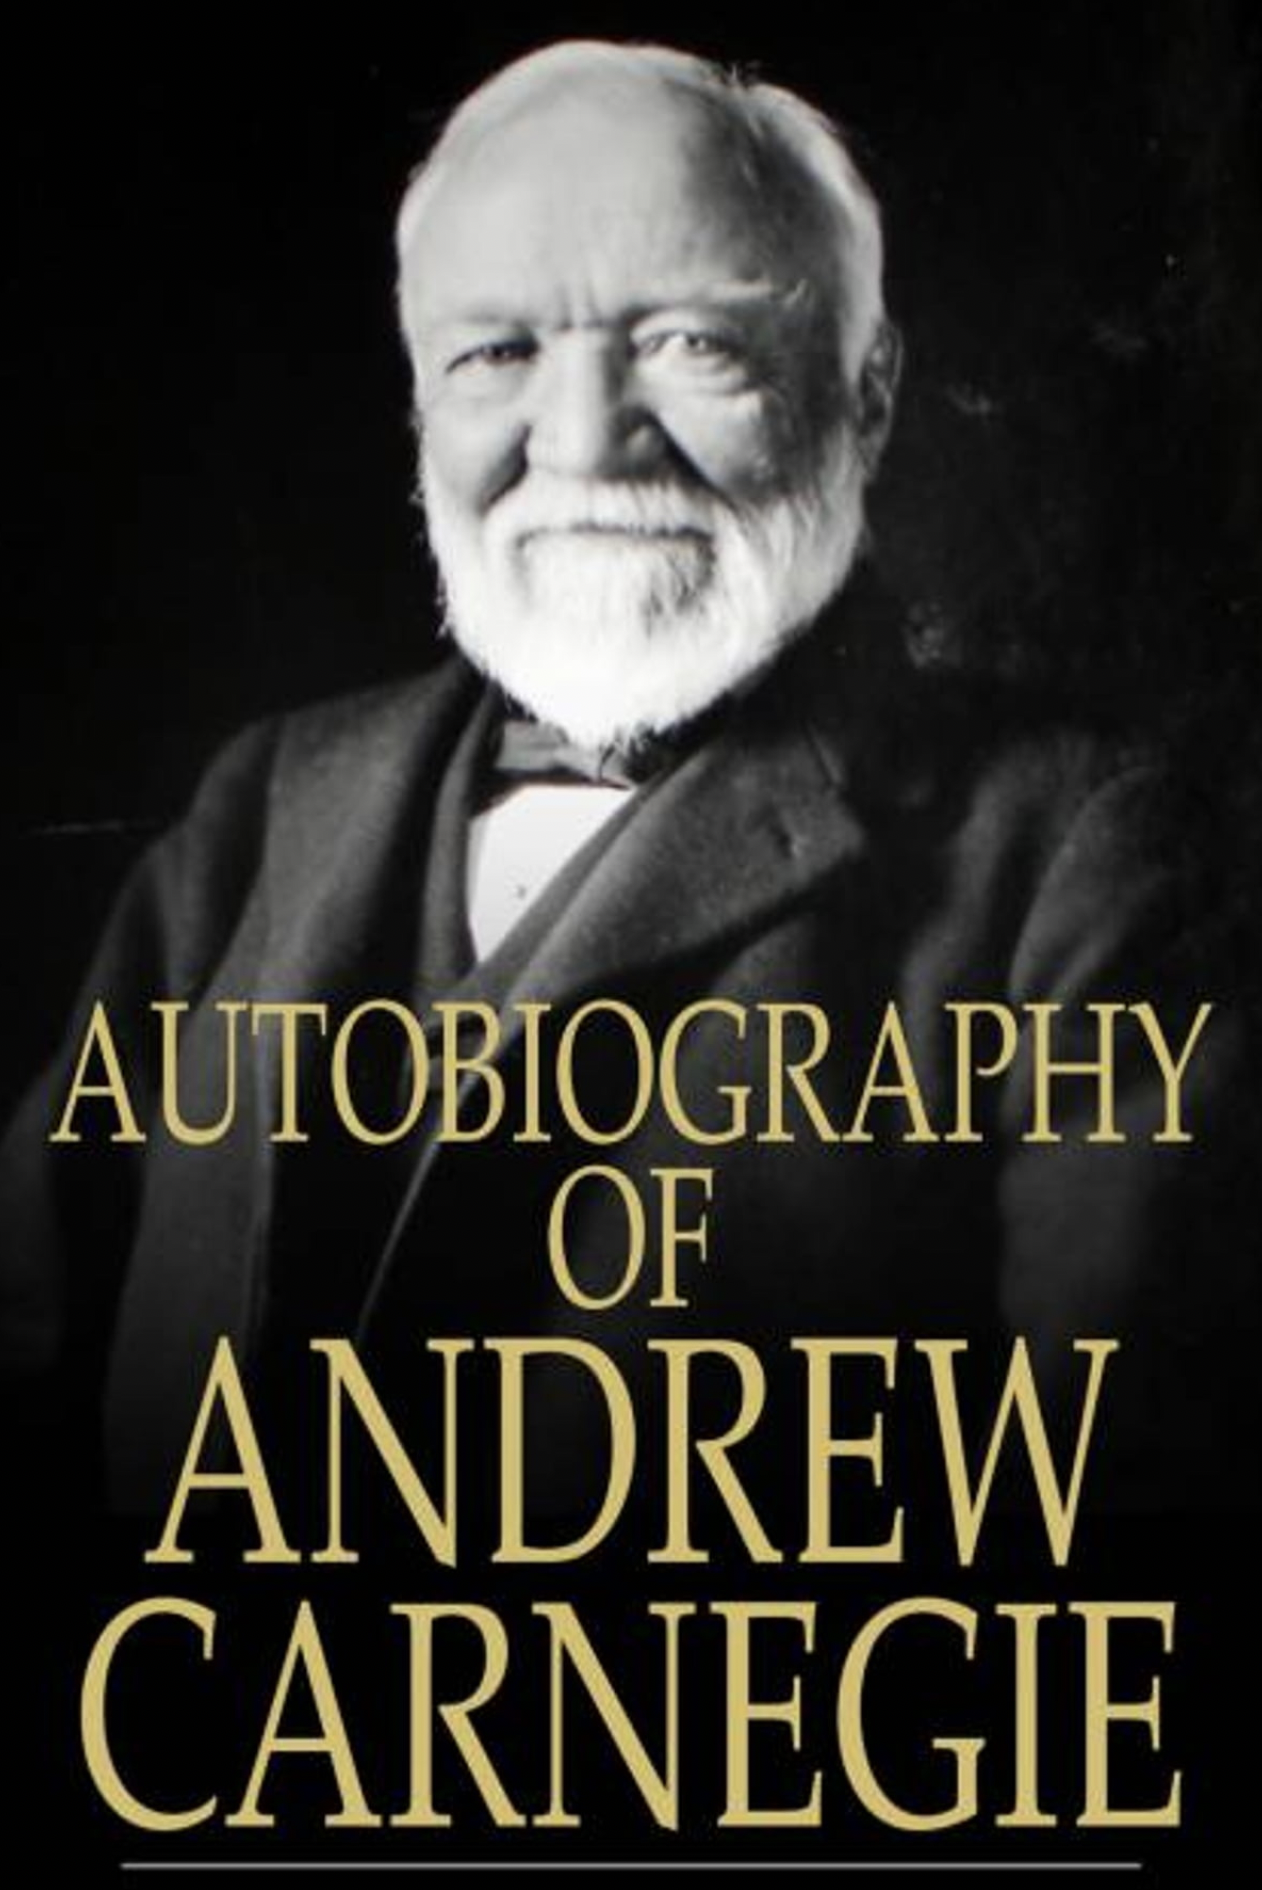 The Autobiography of Andrew Carnegie